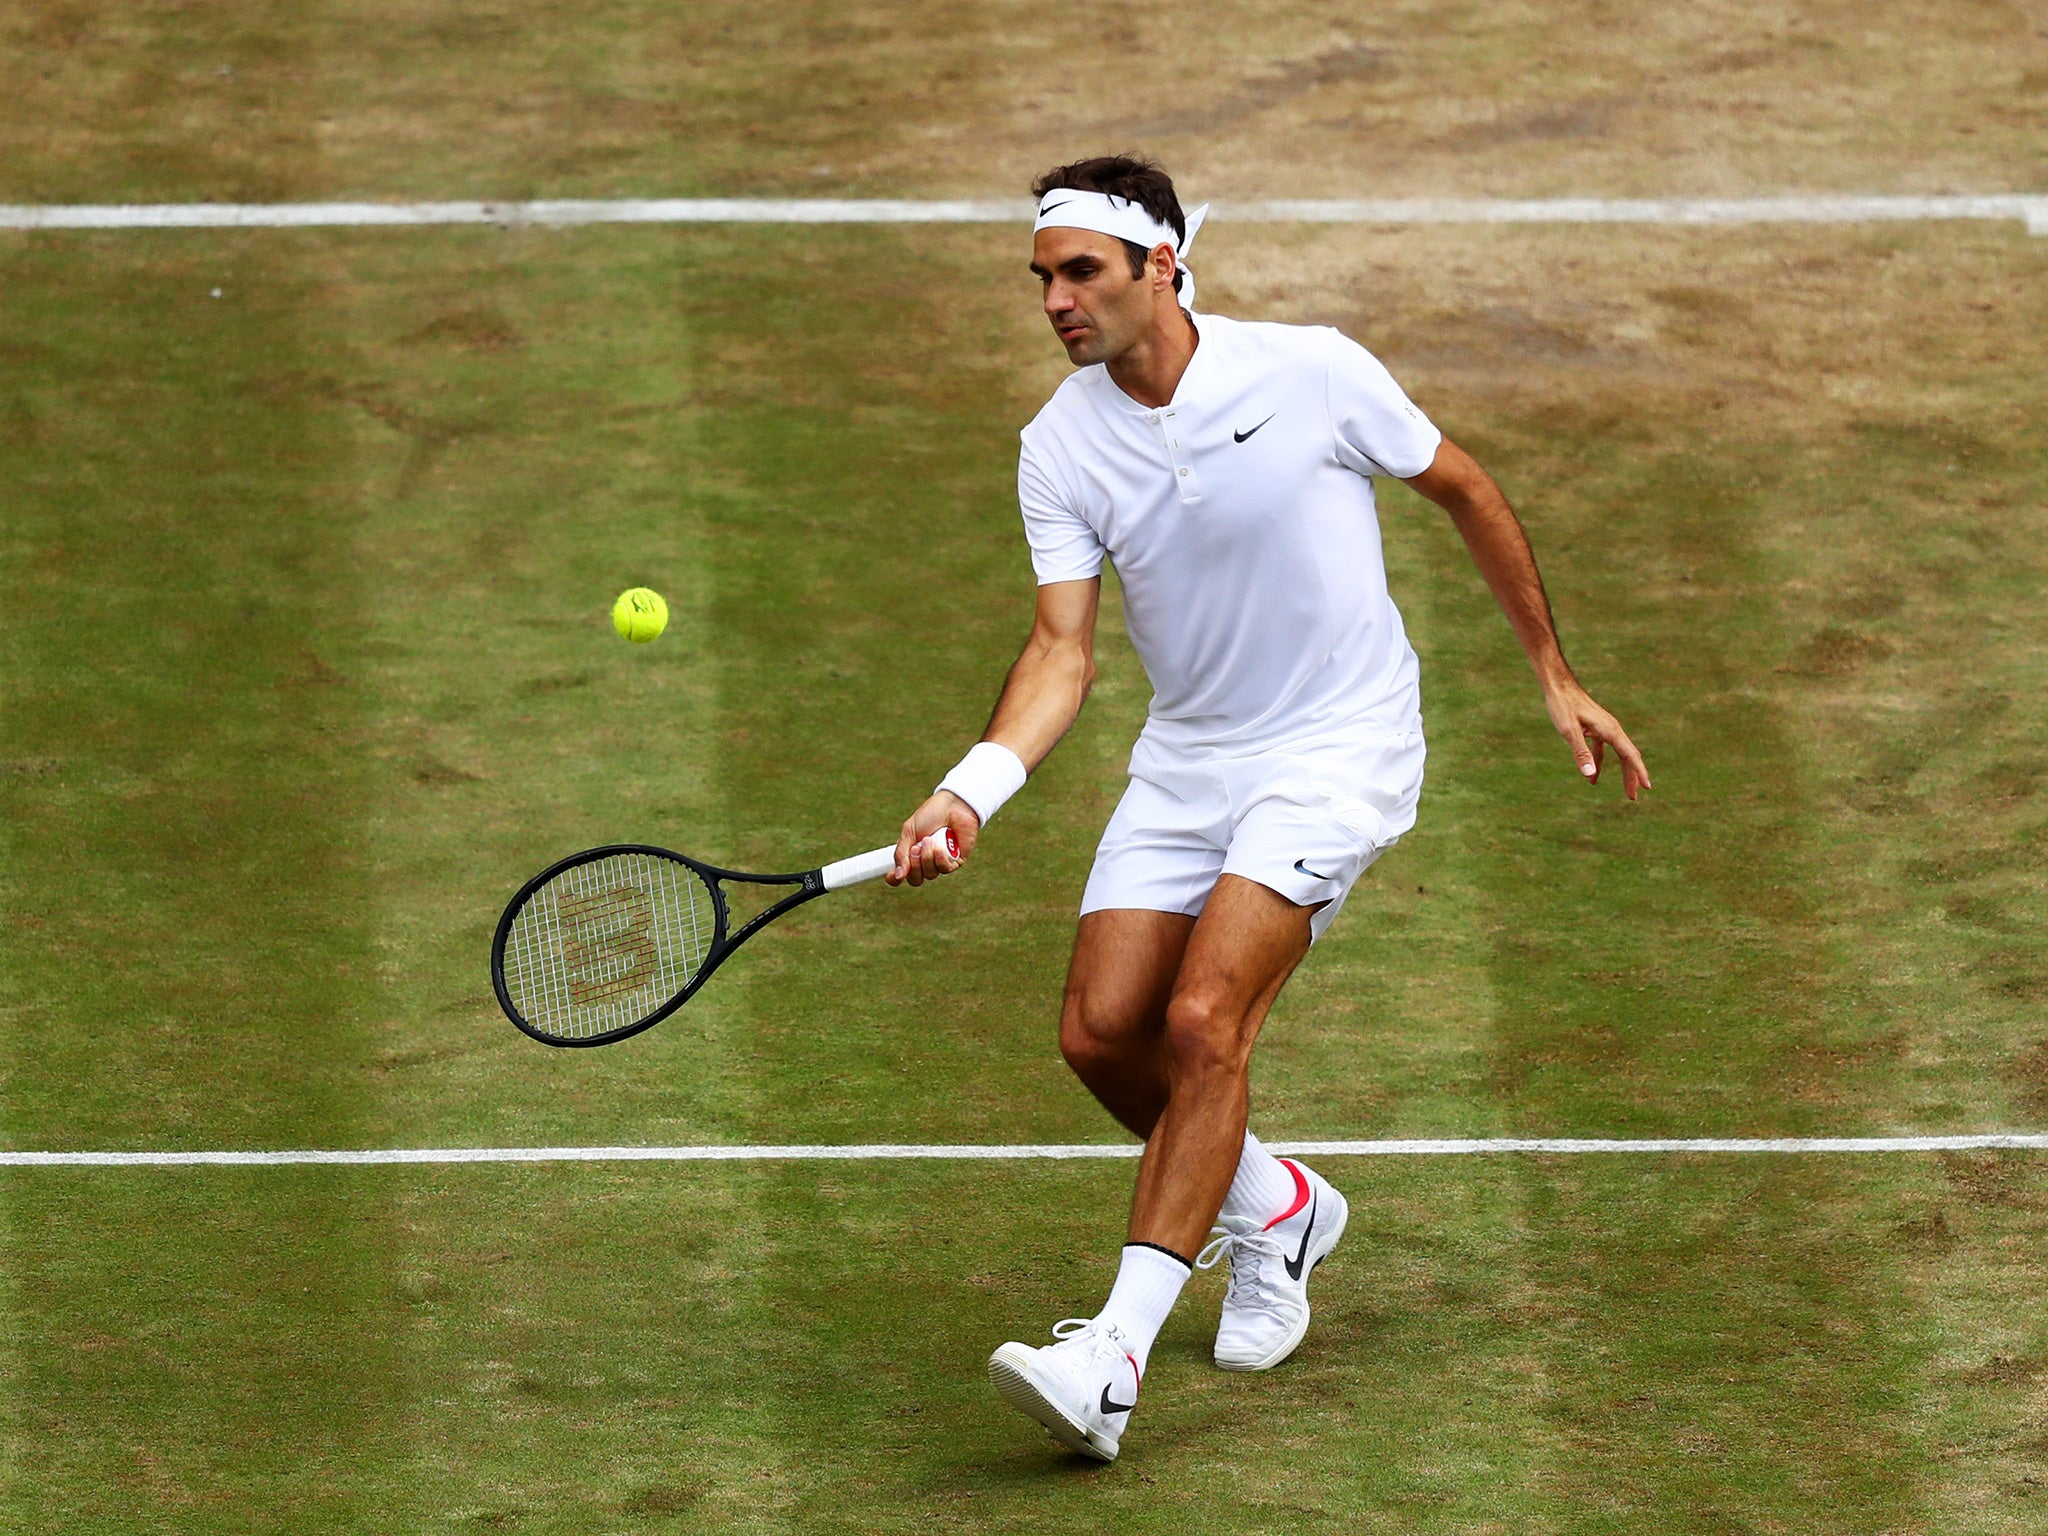 federer match today live streaming